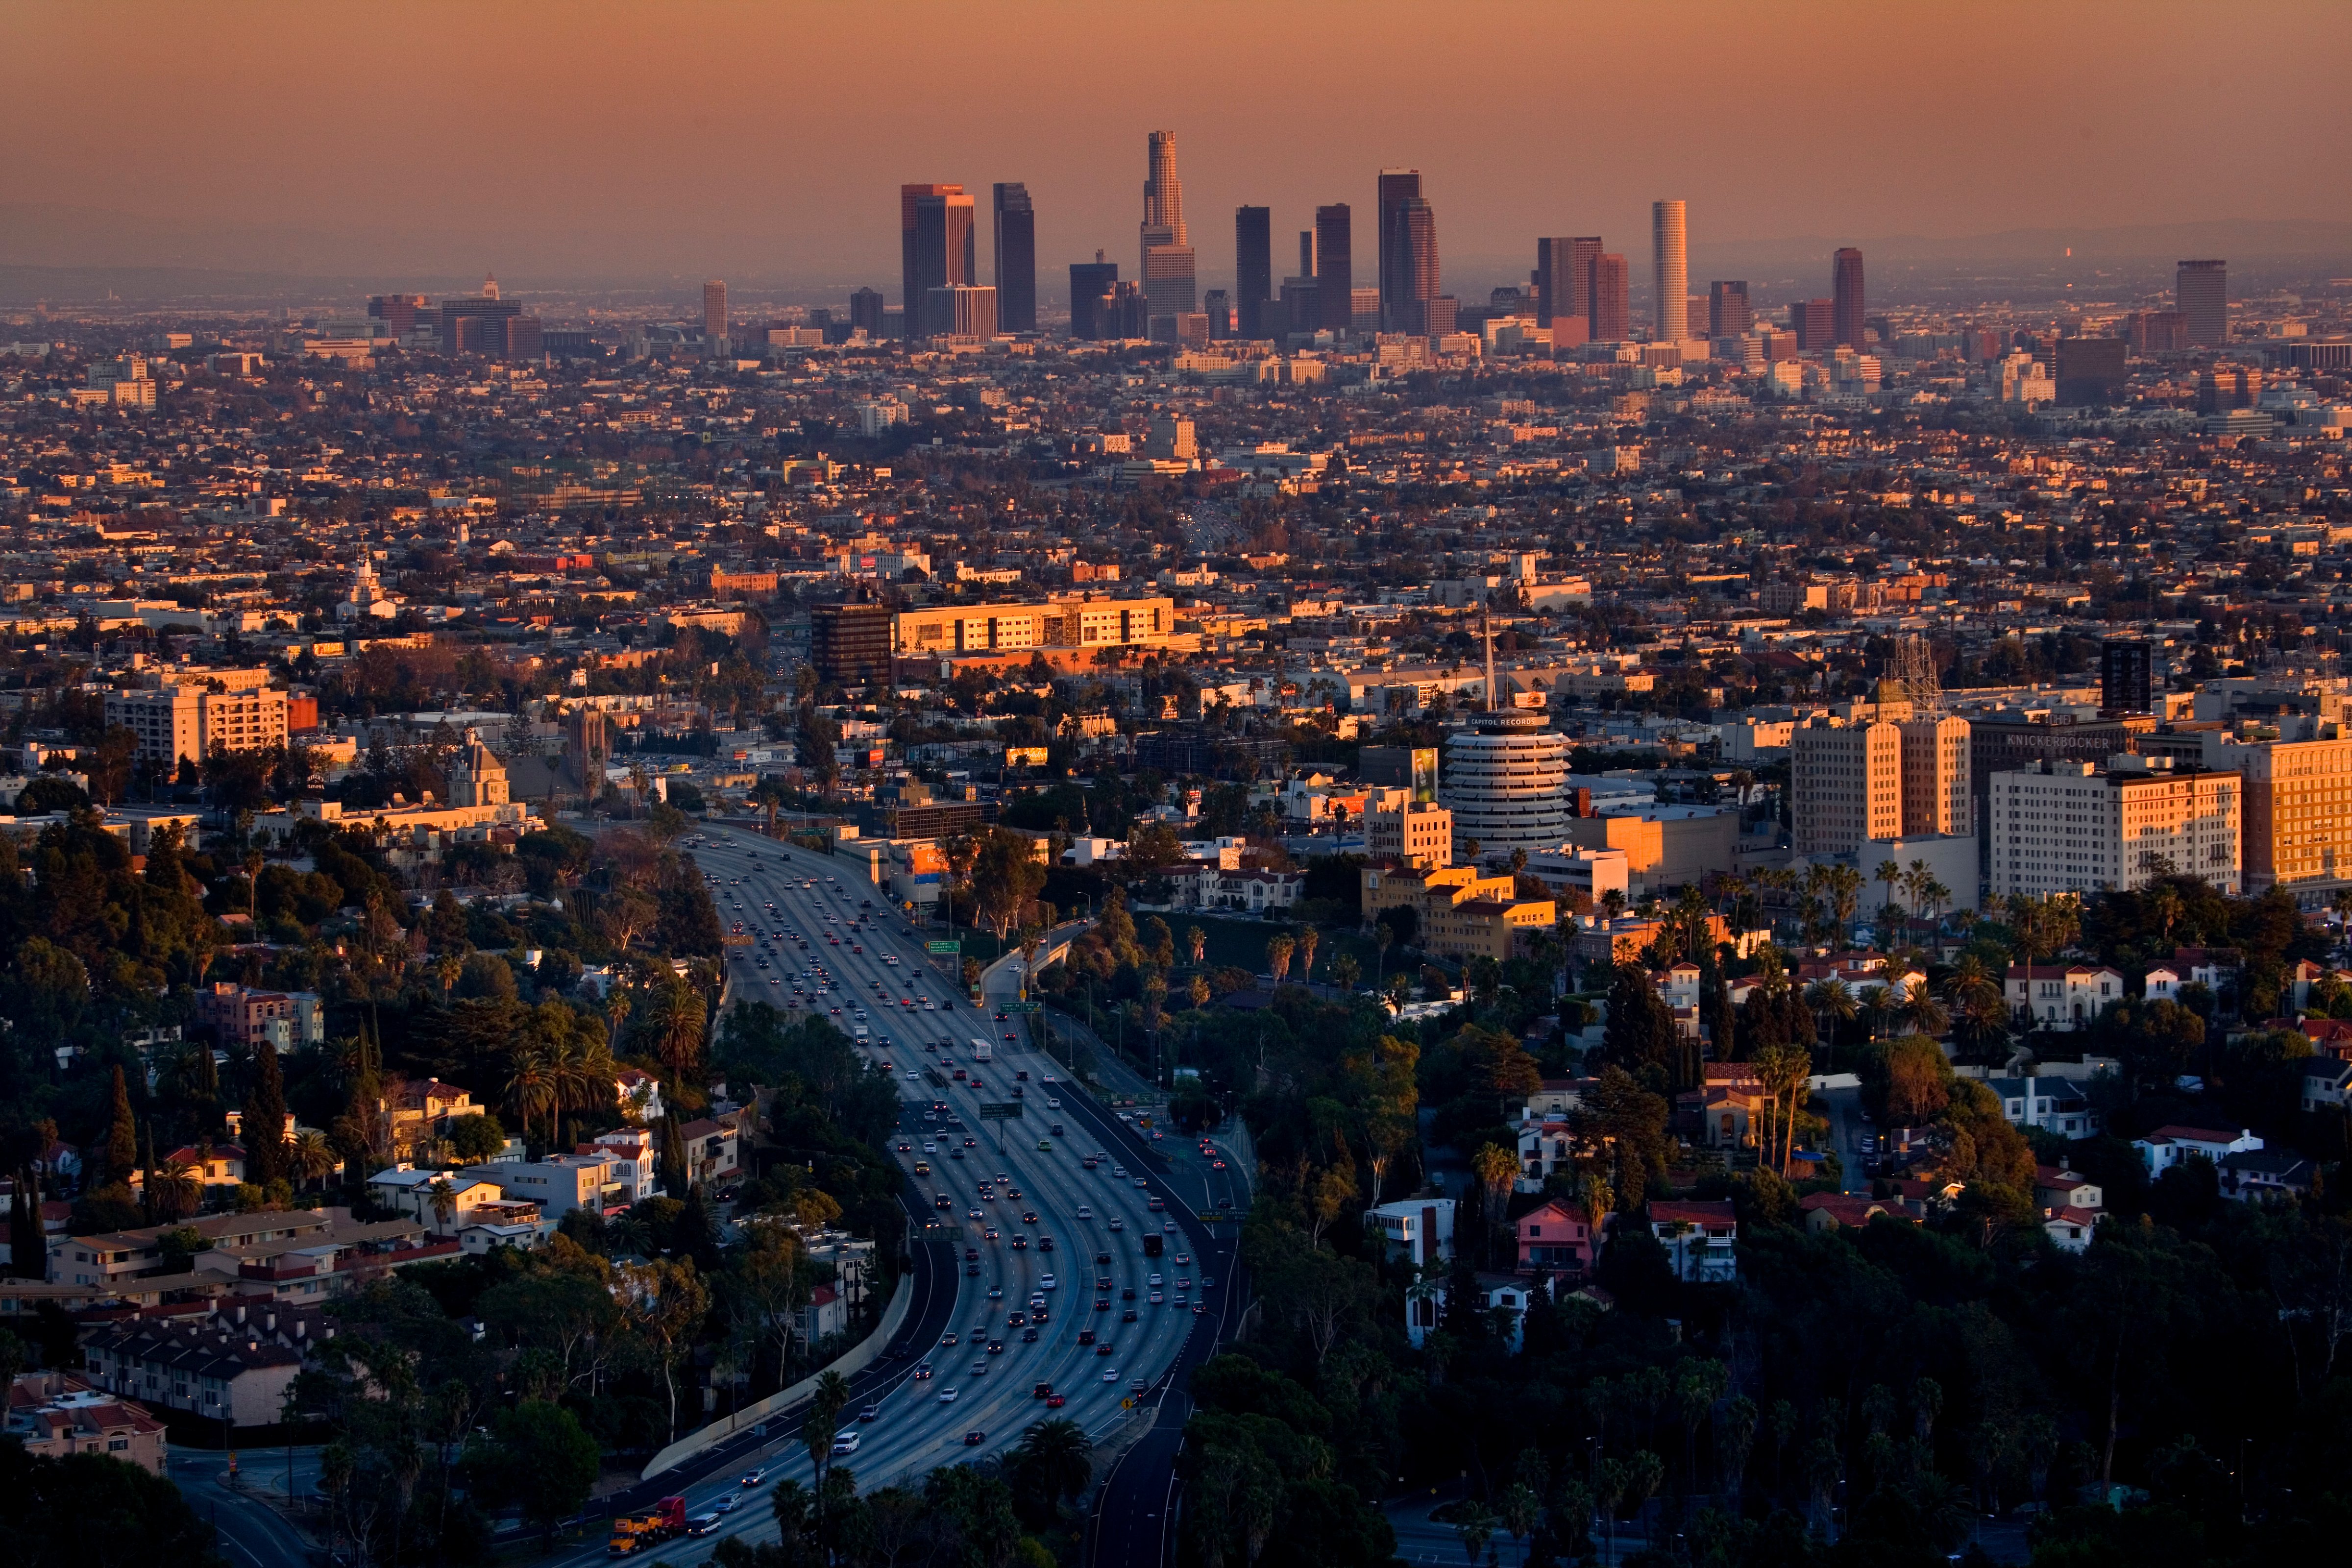 View of Los Angeles at dusk taken from Beverly Hills, Mulholland Drive. The high rise offices of downtown are in the background, Hollywood in the foreground. (Barry Lewis—Corbis/Getty Images)